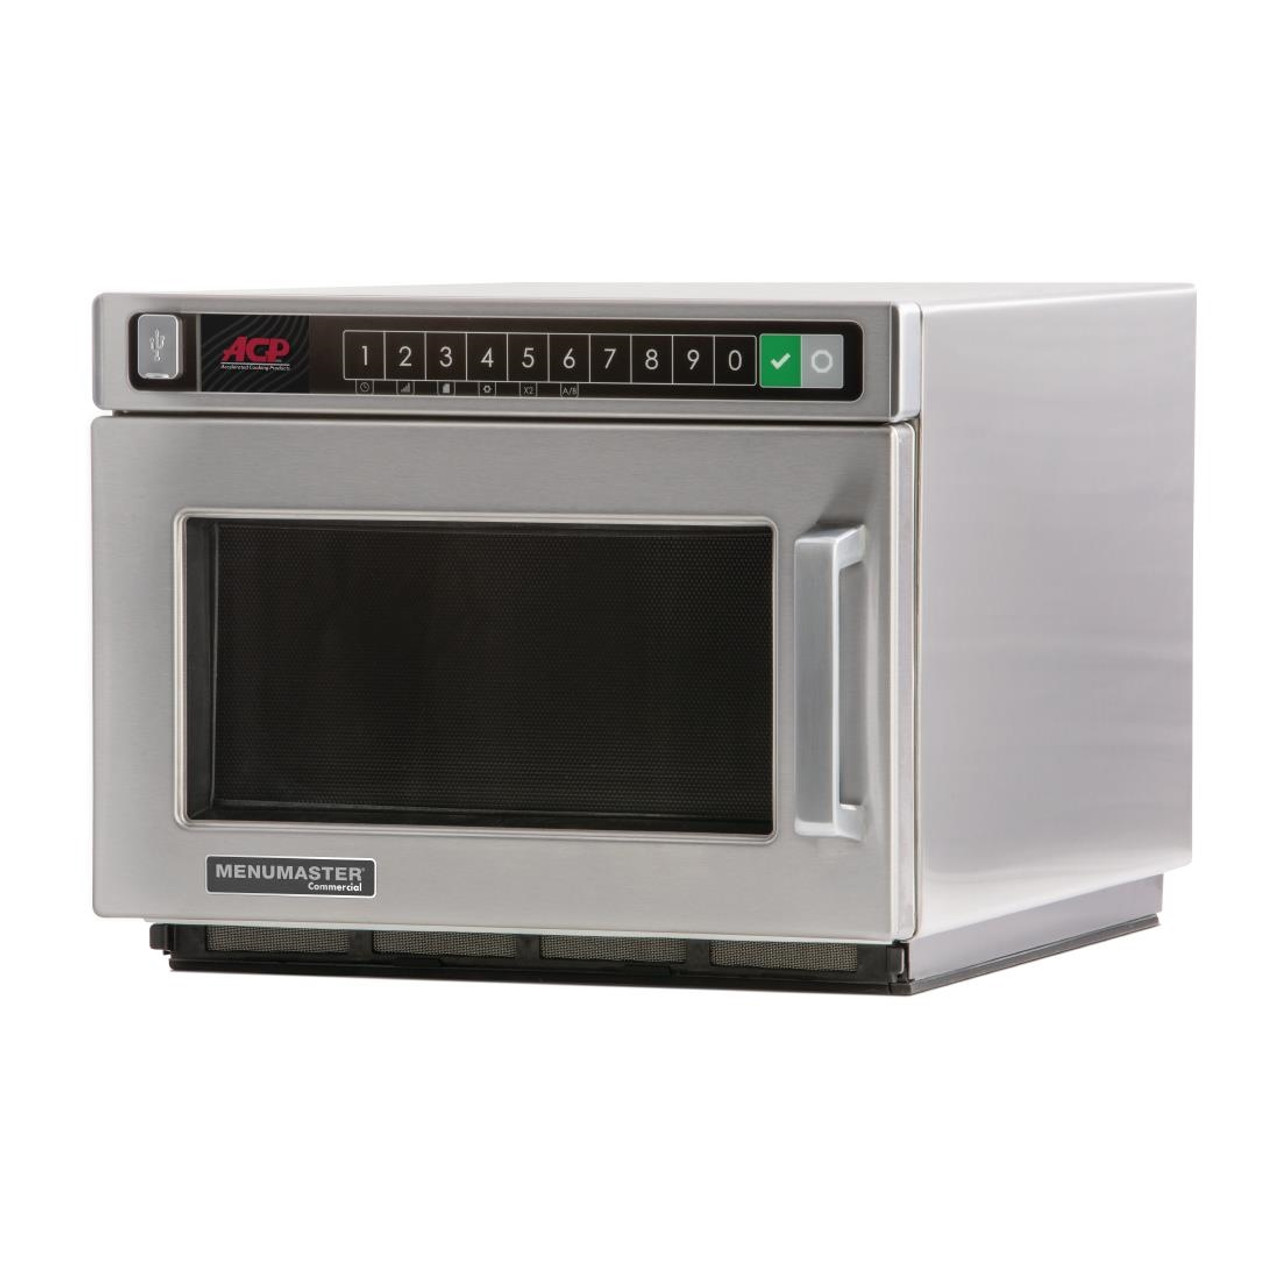 Heavy Duty Commercial Compact Microwave Oven